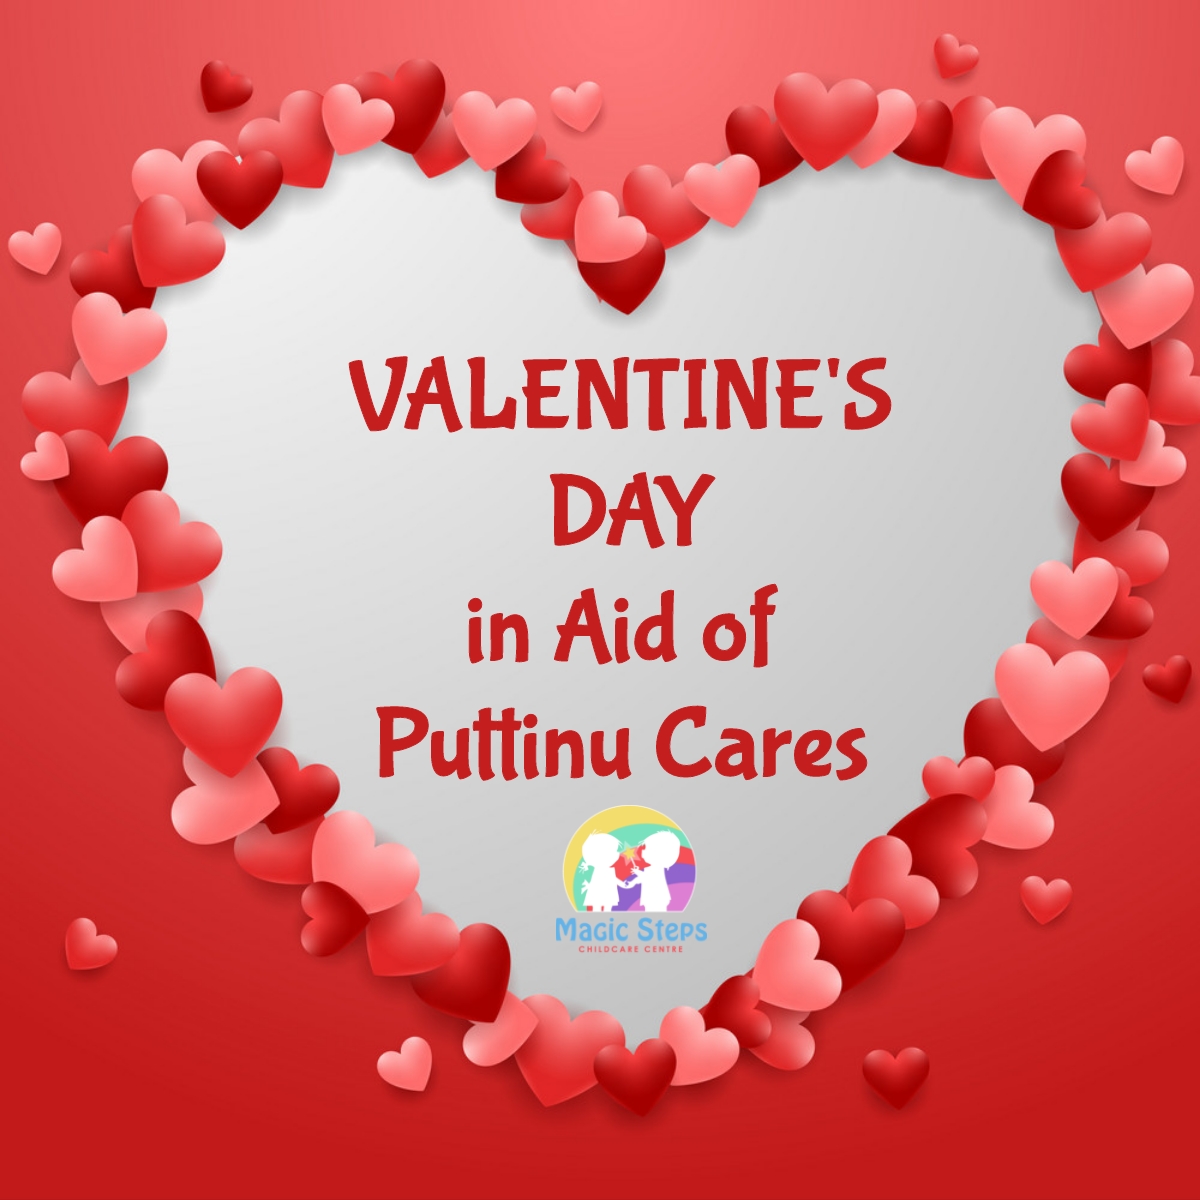 Valentine's Day-Tuesday 14th February